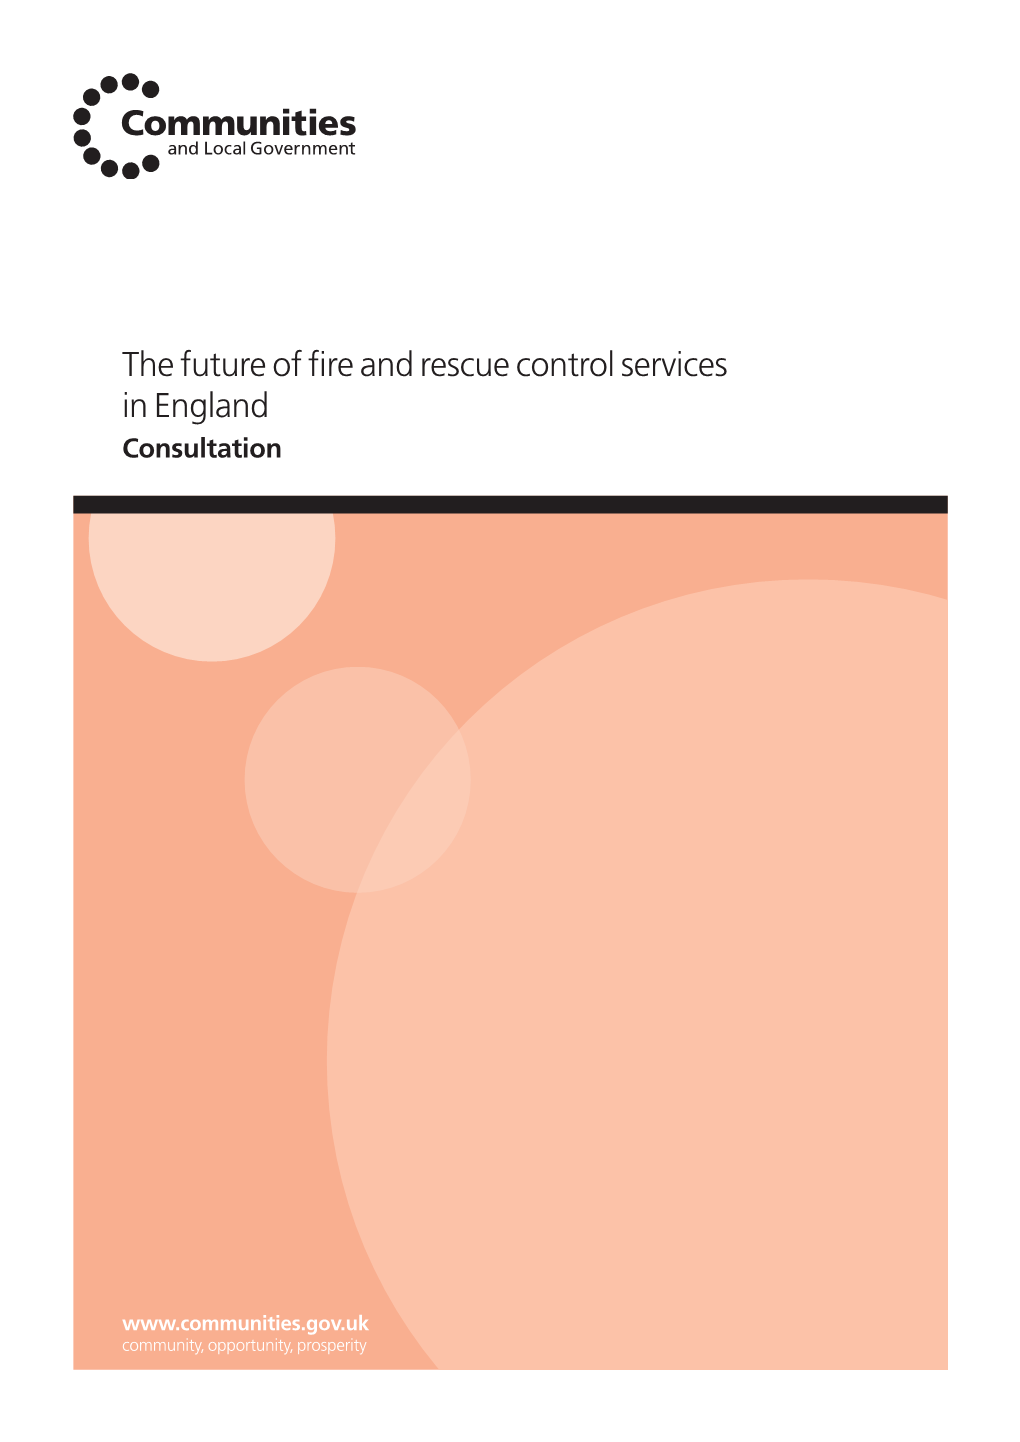 The Future of Fire and Rescue Control Services in England Consultation